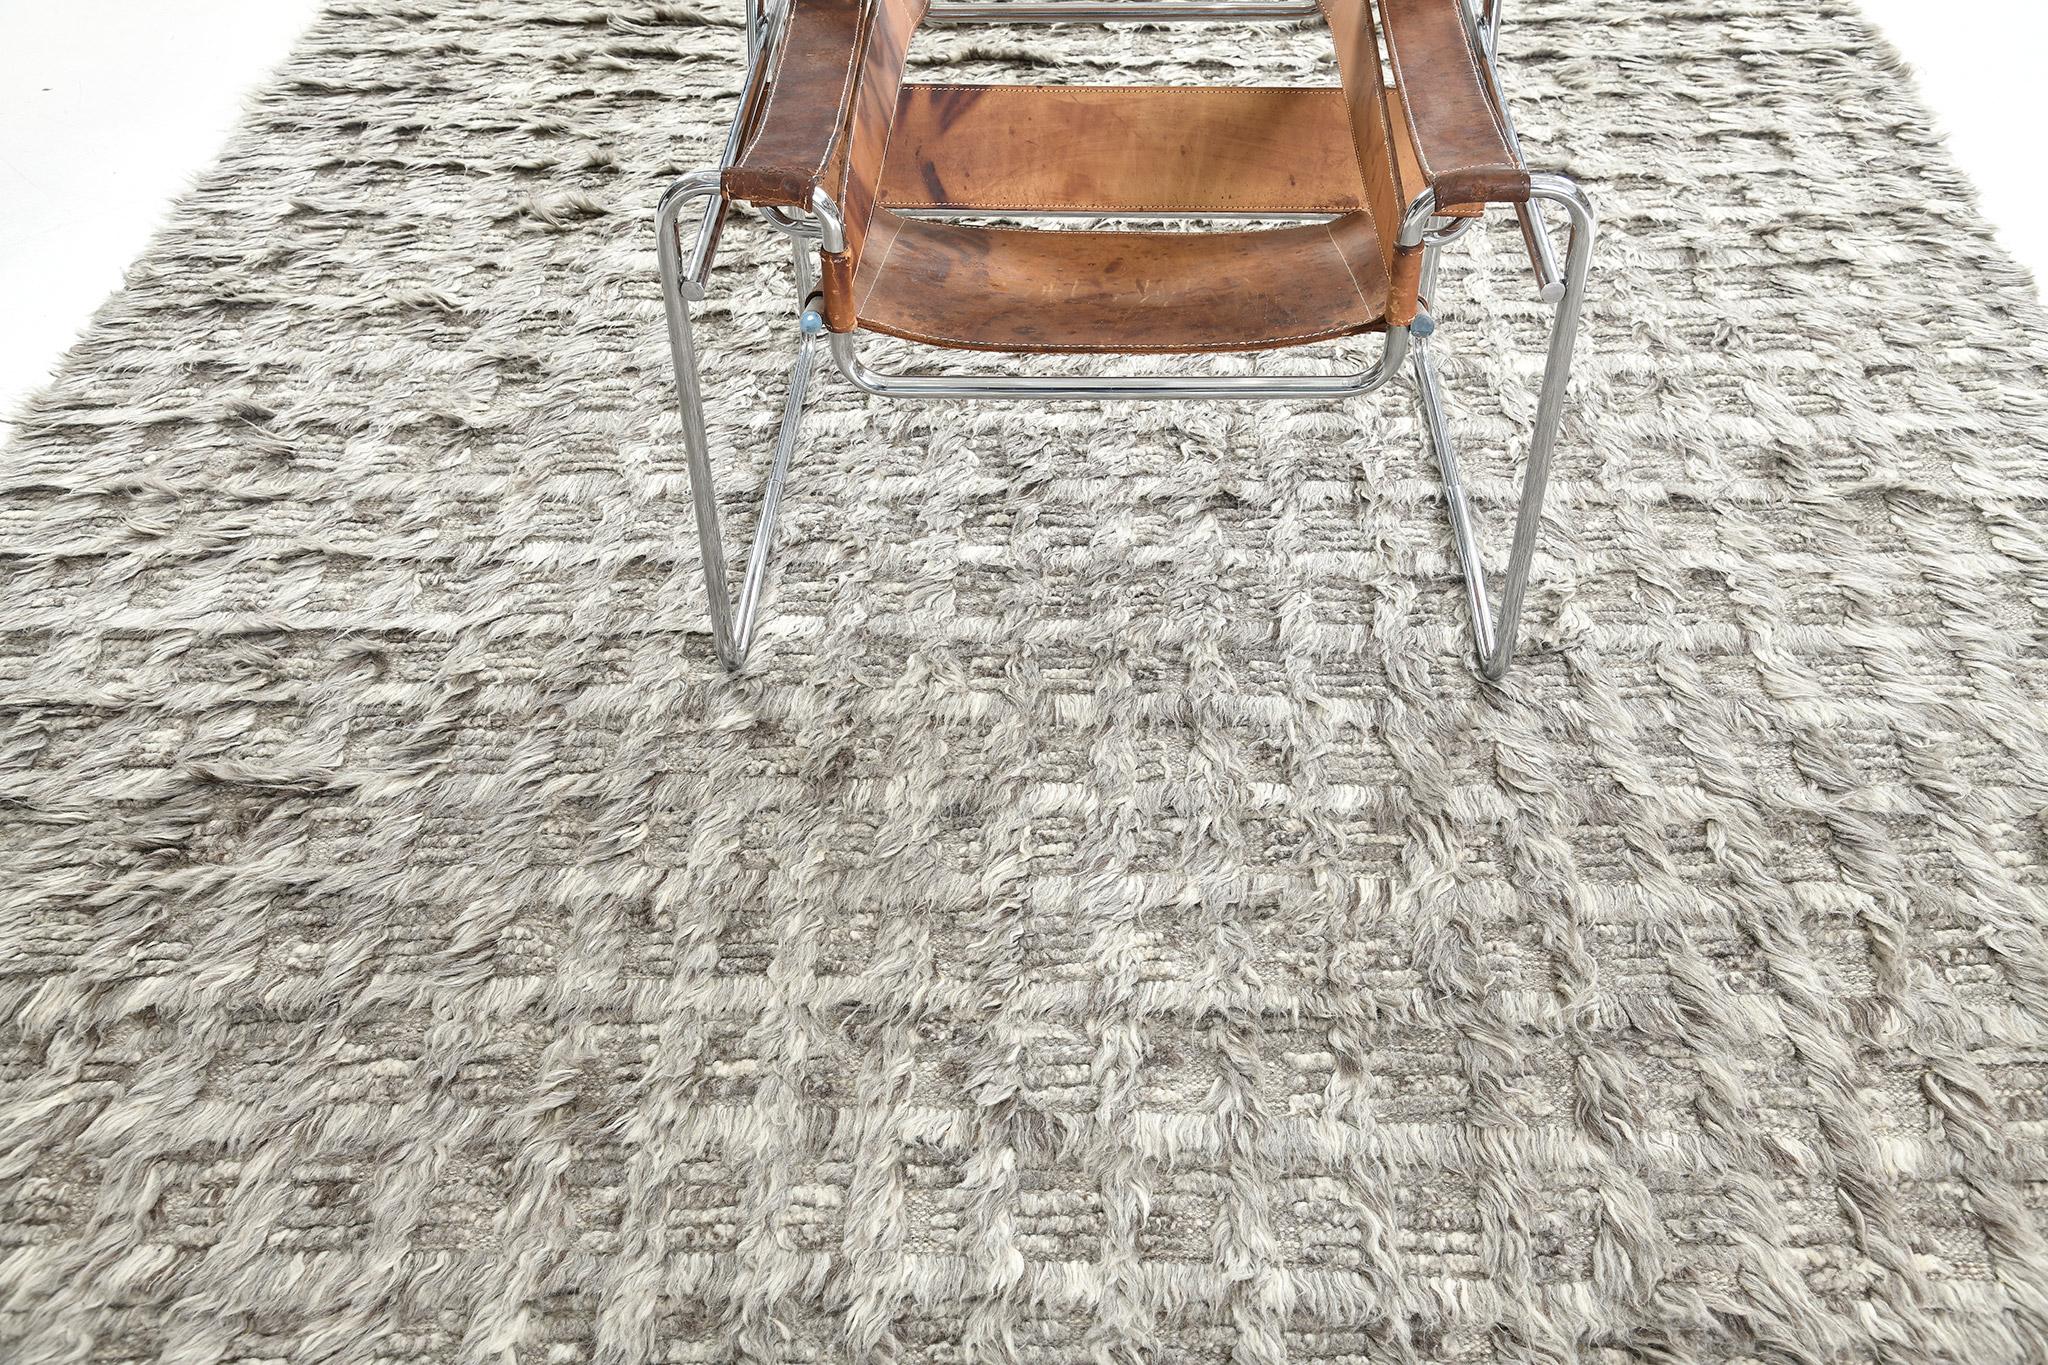 The Mani rug is a monochrome design syncopating long and short pile with open flatweave. This piece is made in tones of cool heathered gray.

An extension of Mehraban’s popular Amihan design, the Sahara Collection delves further with grid-riffs of